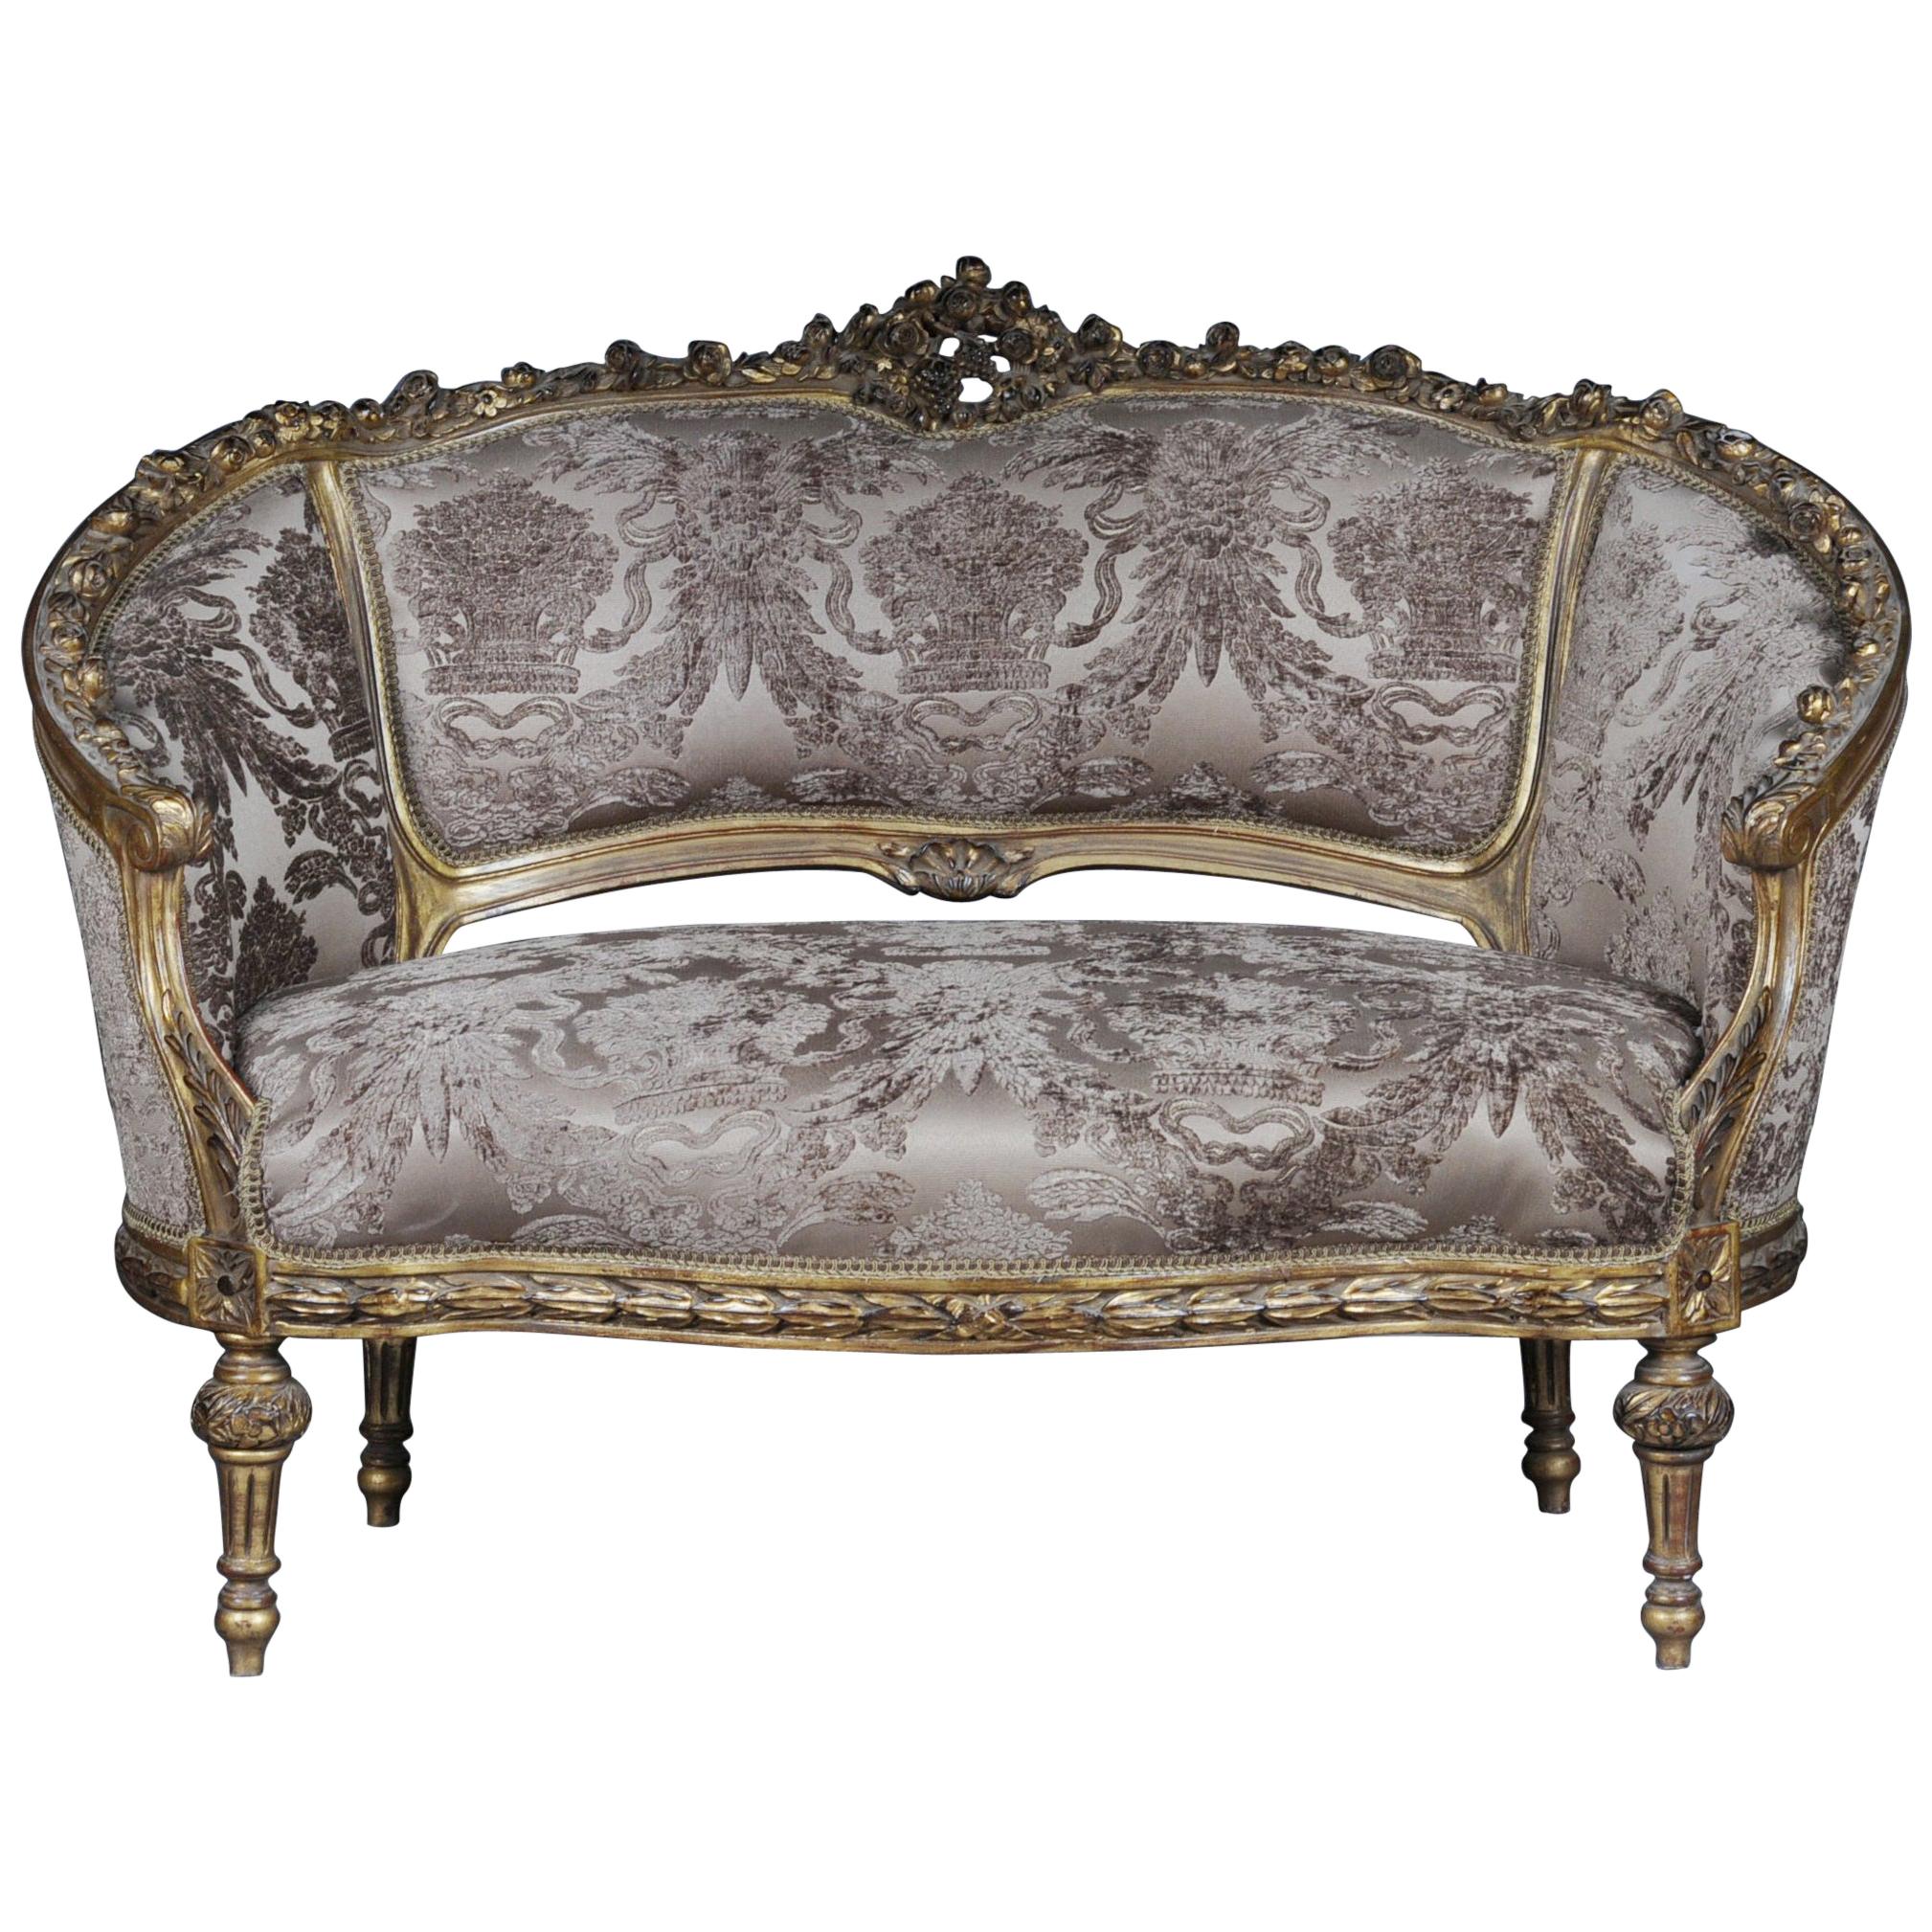 Decorative French Sofa, Canapé in Louis XVI Seize For Sale